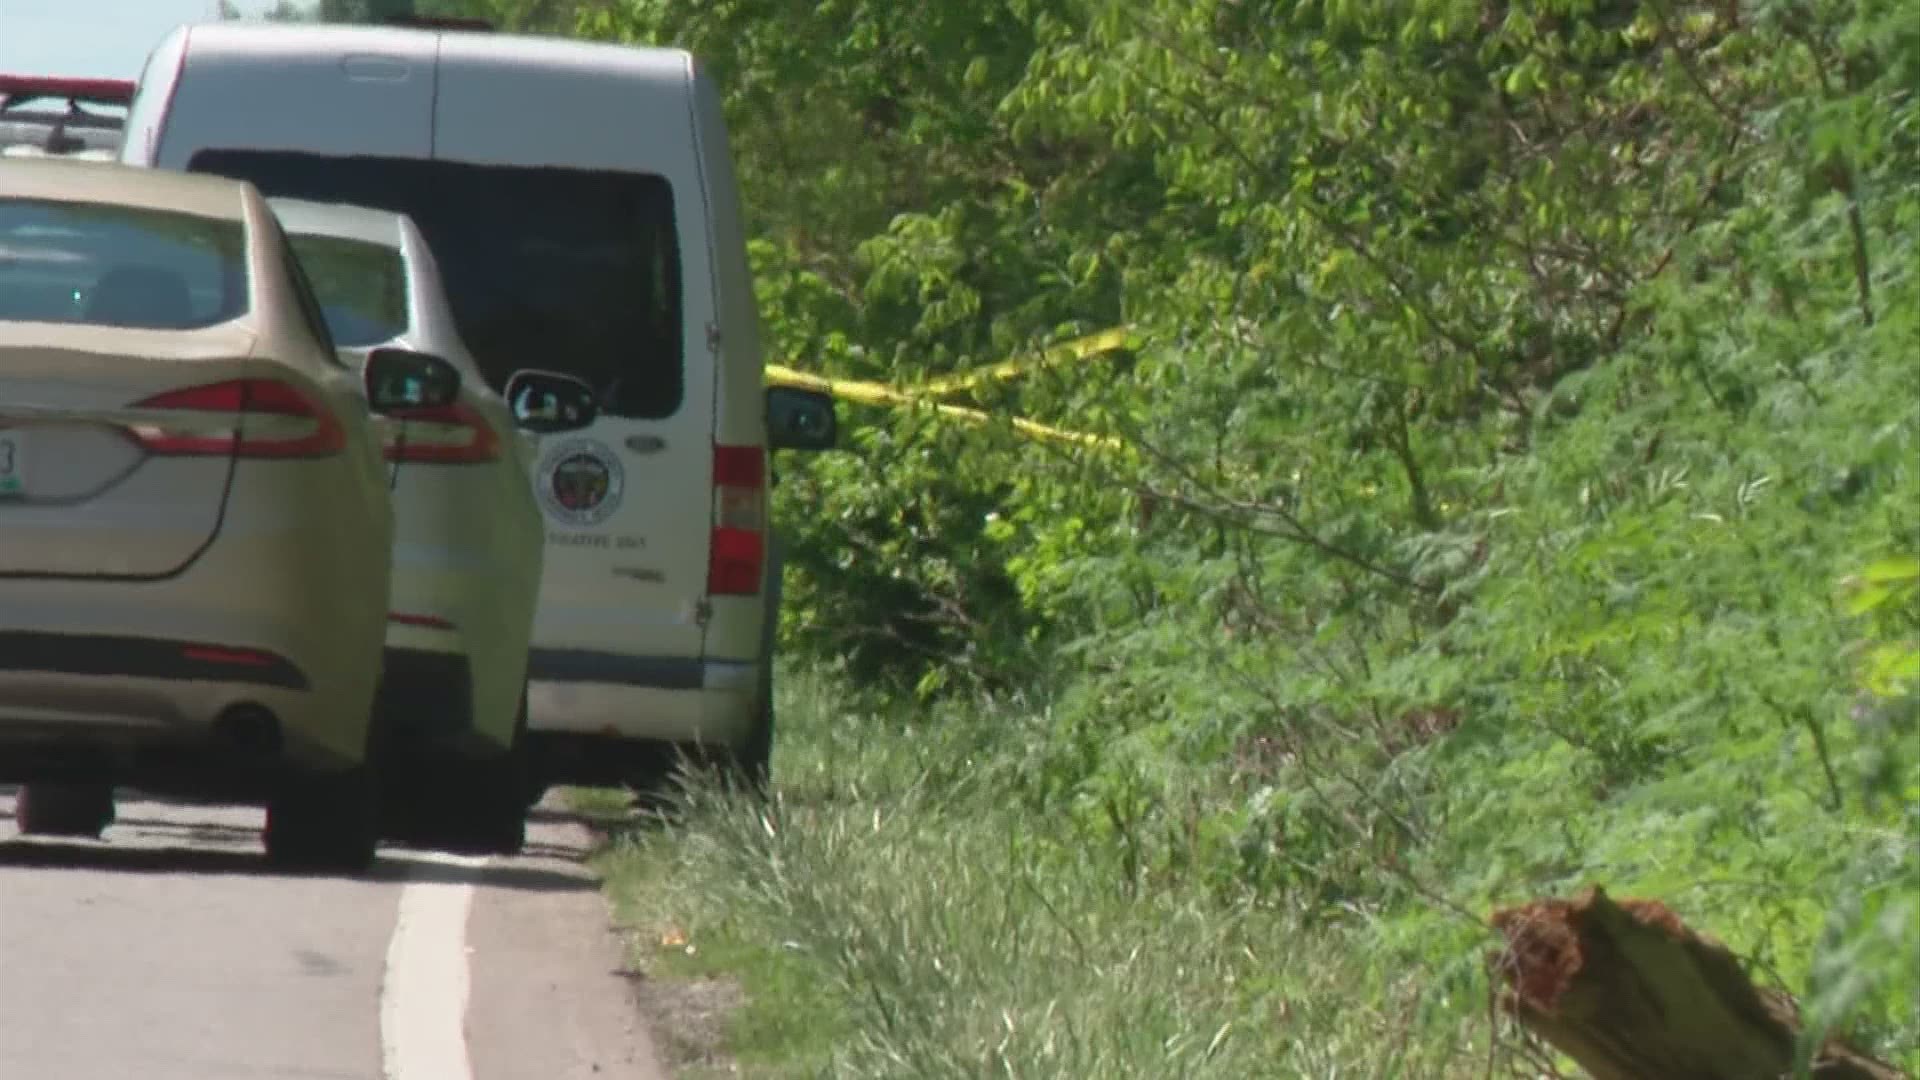 Police said the man was found along Brice Road, north of Shannon Road, around 9:15 a.m.